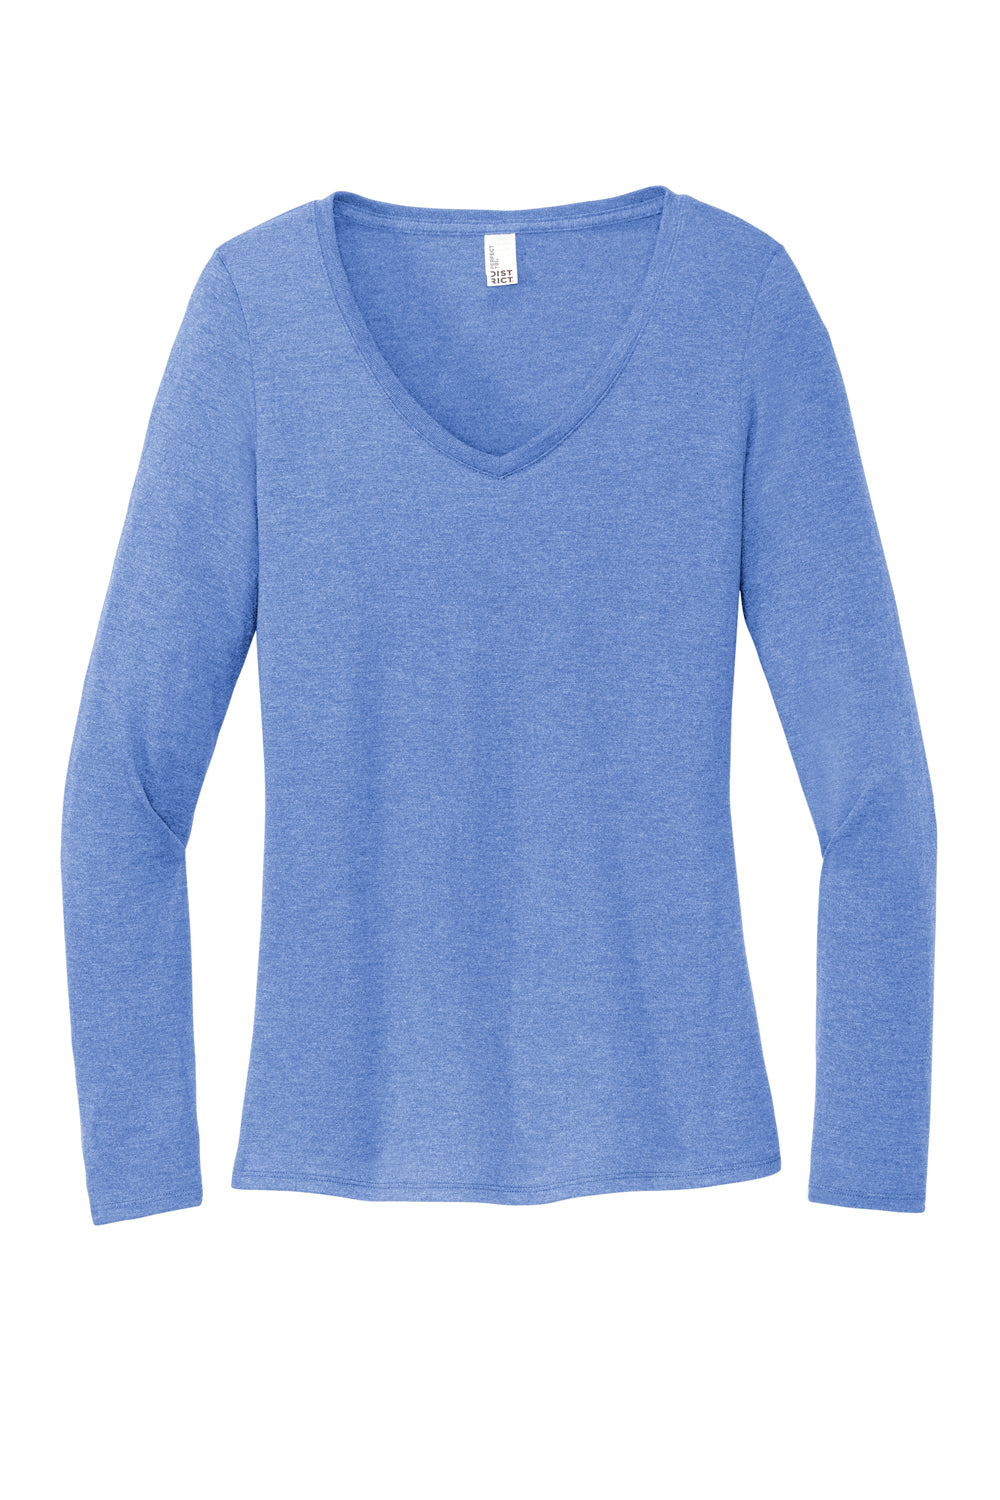 District DT135 Womens Perfect Tri Long Sleeve V-Neck T-Shirt Maritime Blue Frost Flat Front